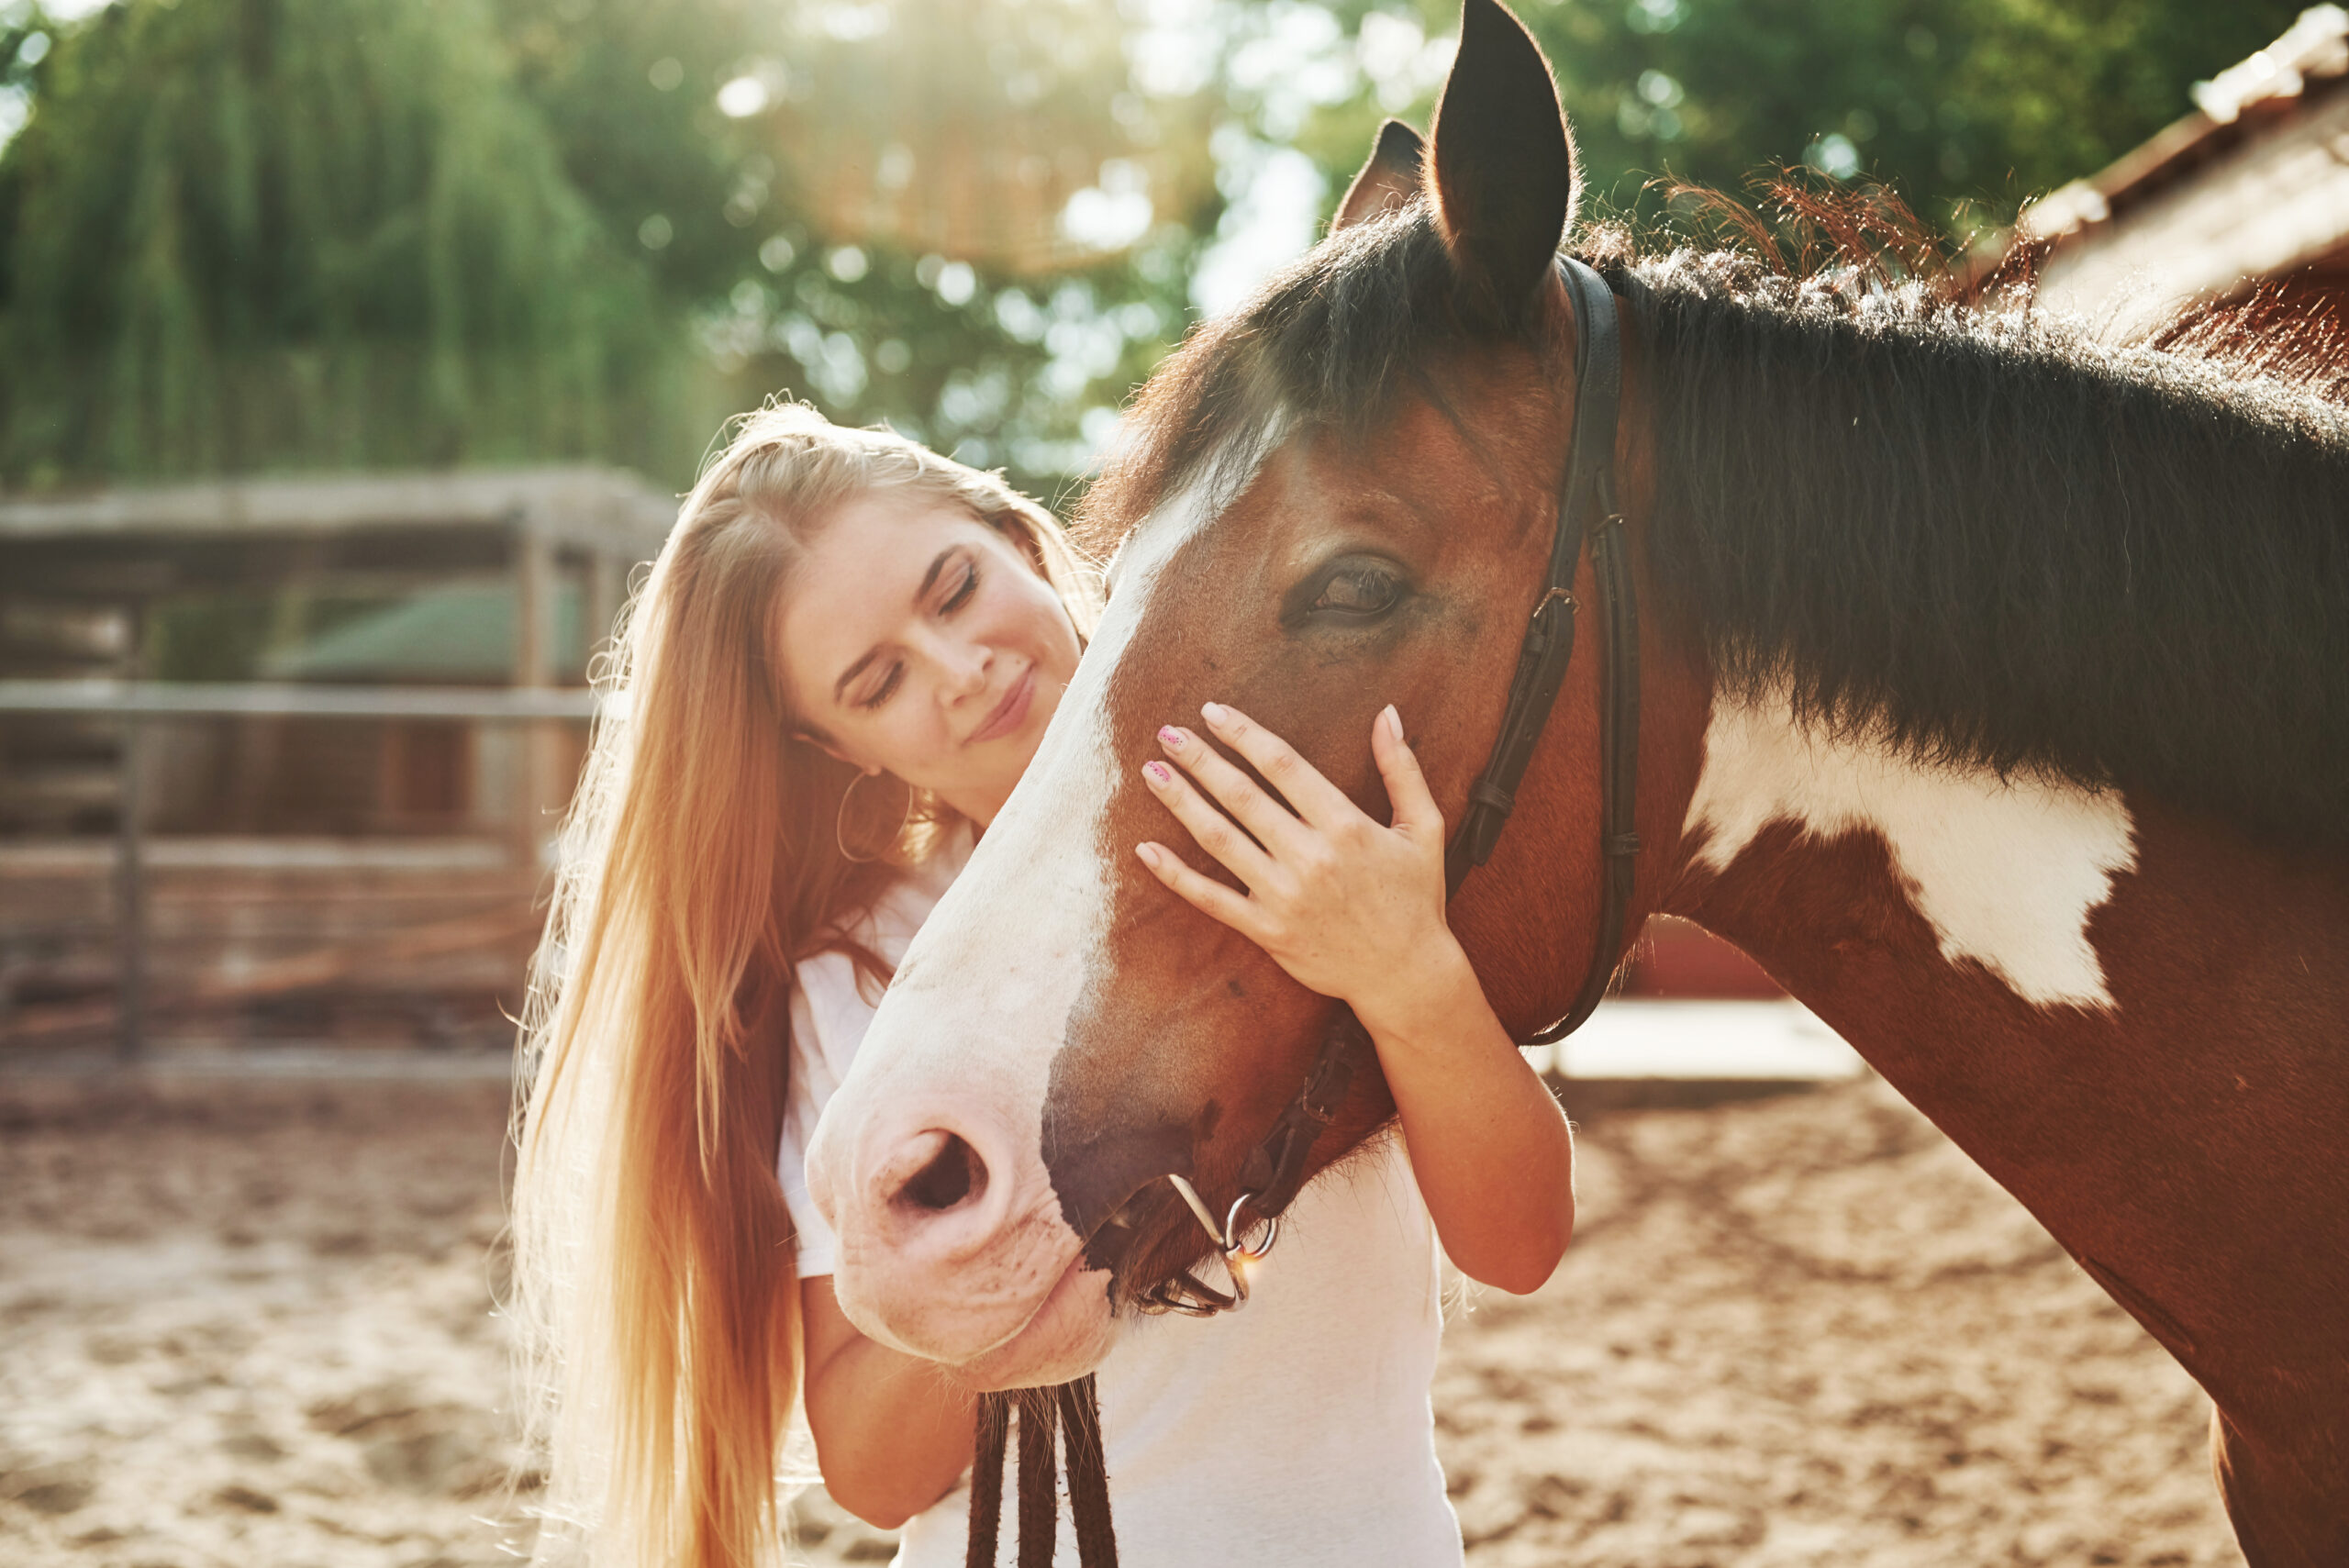 Together with favourite owner. Happy woman with her horse on the ranch at daytime